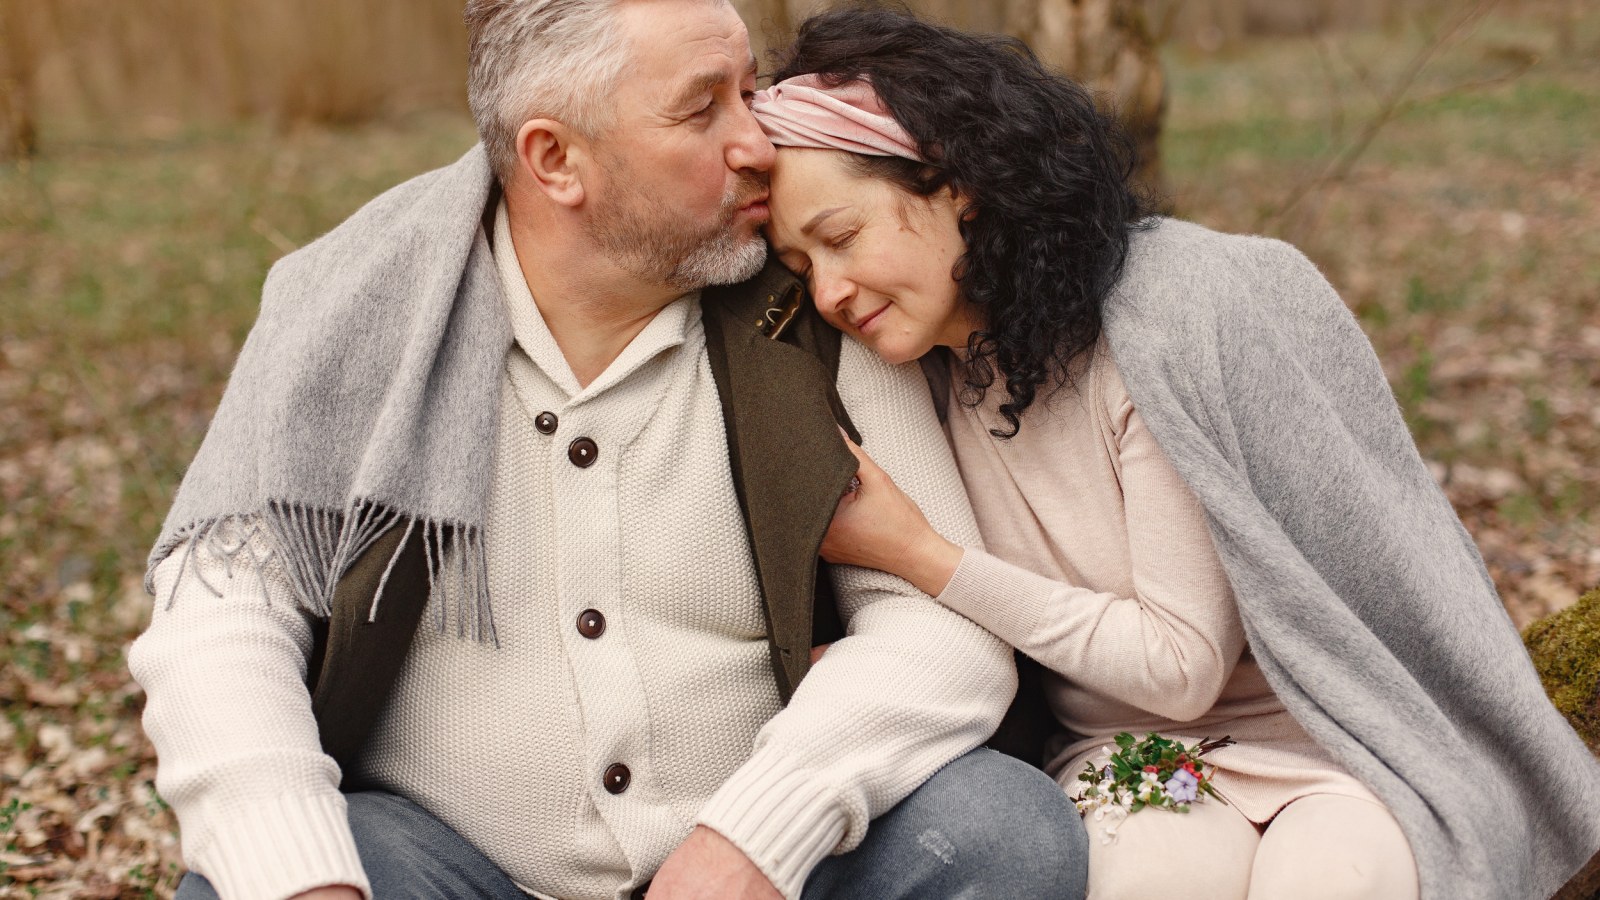 Best Senior Dating Sites for Meeting Singles Over 50, 60, or 70+